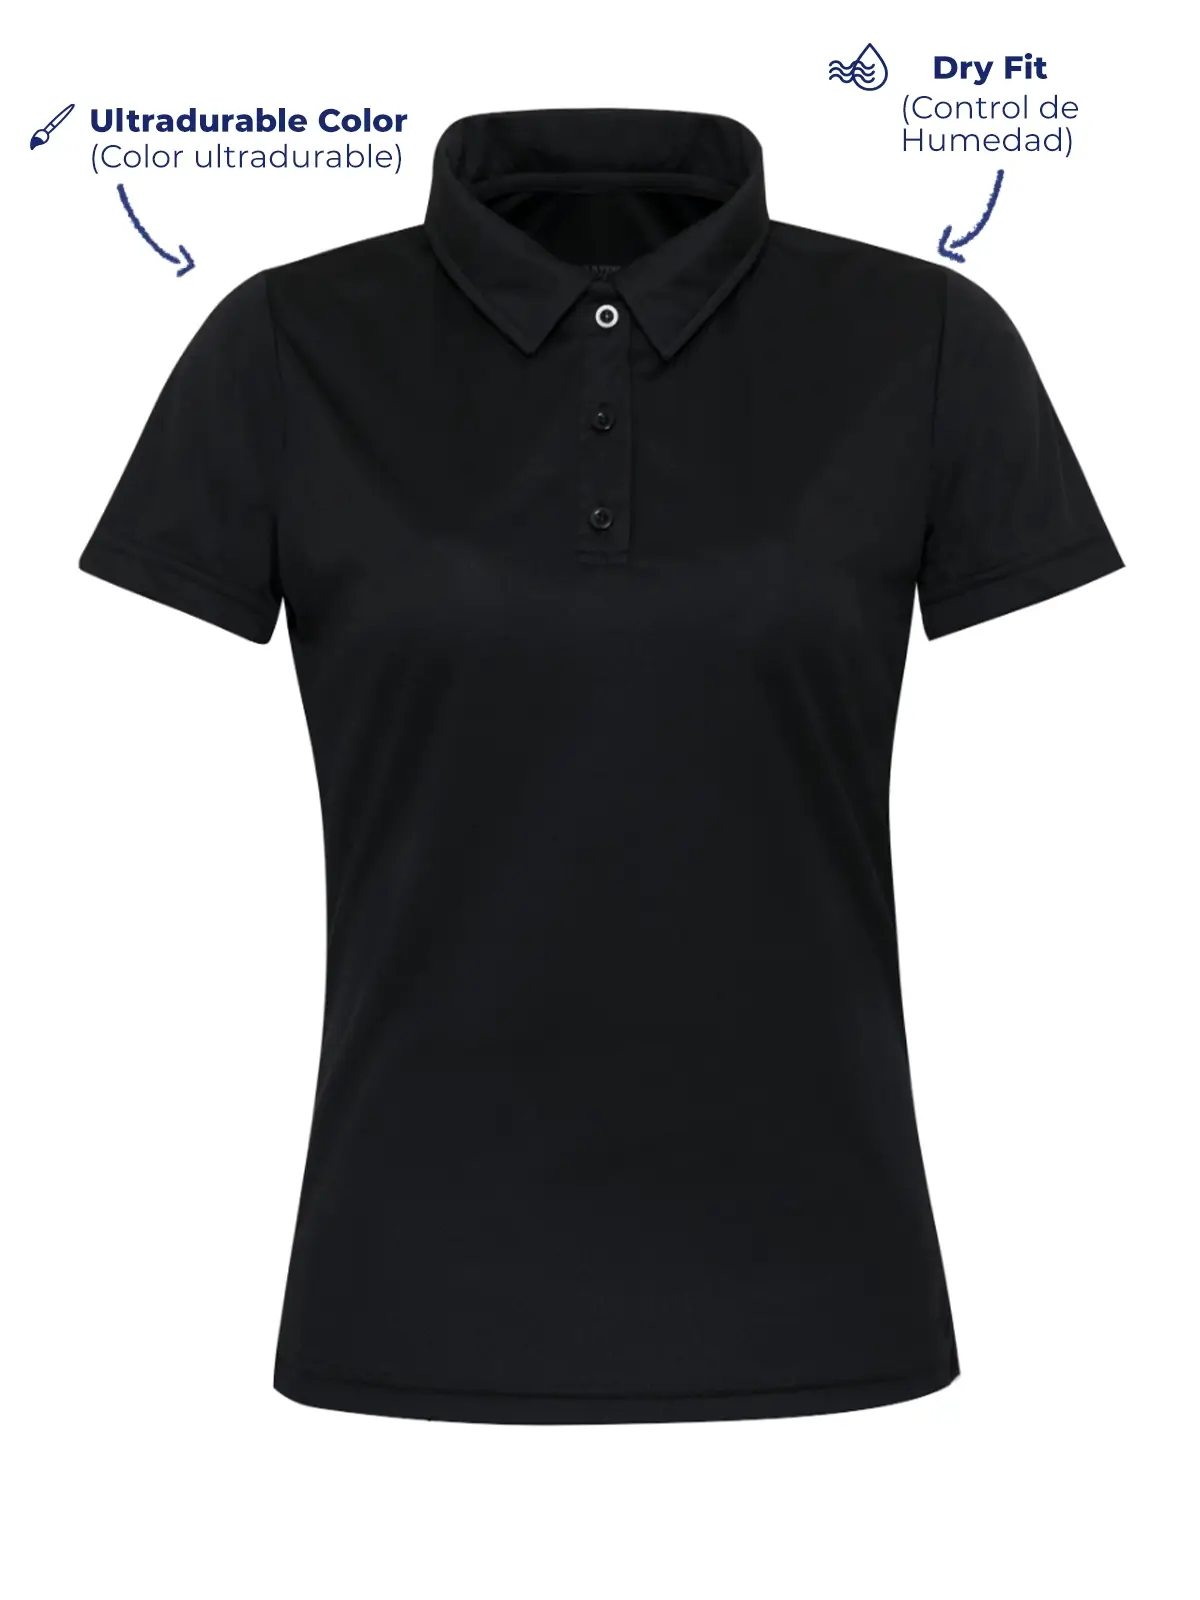 P900 black polo shirt for women front view